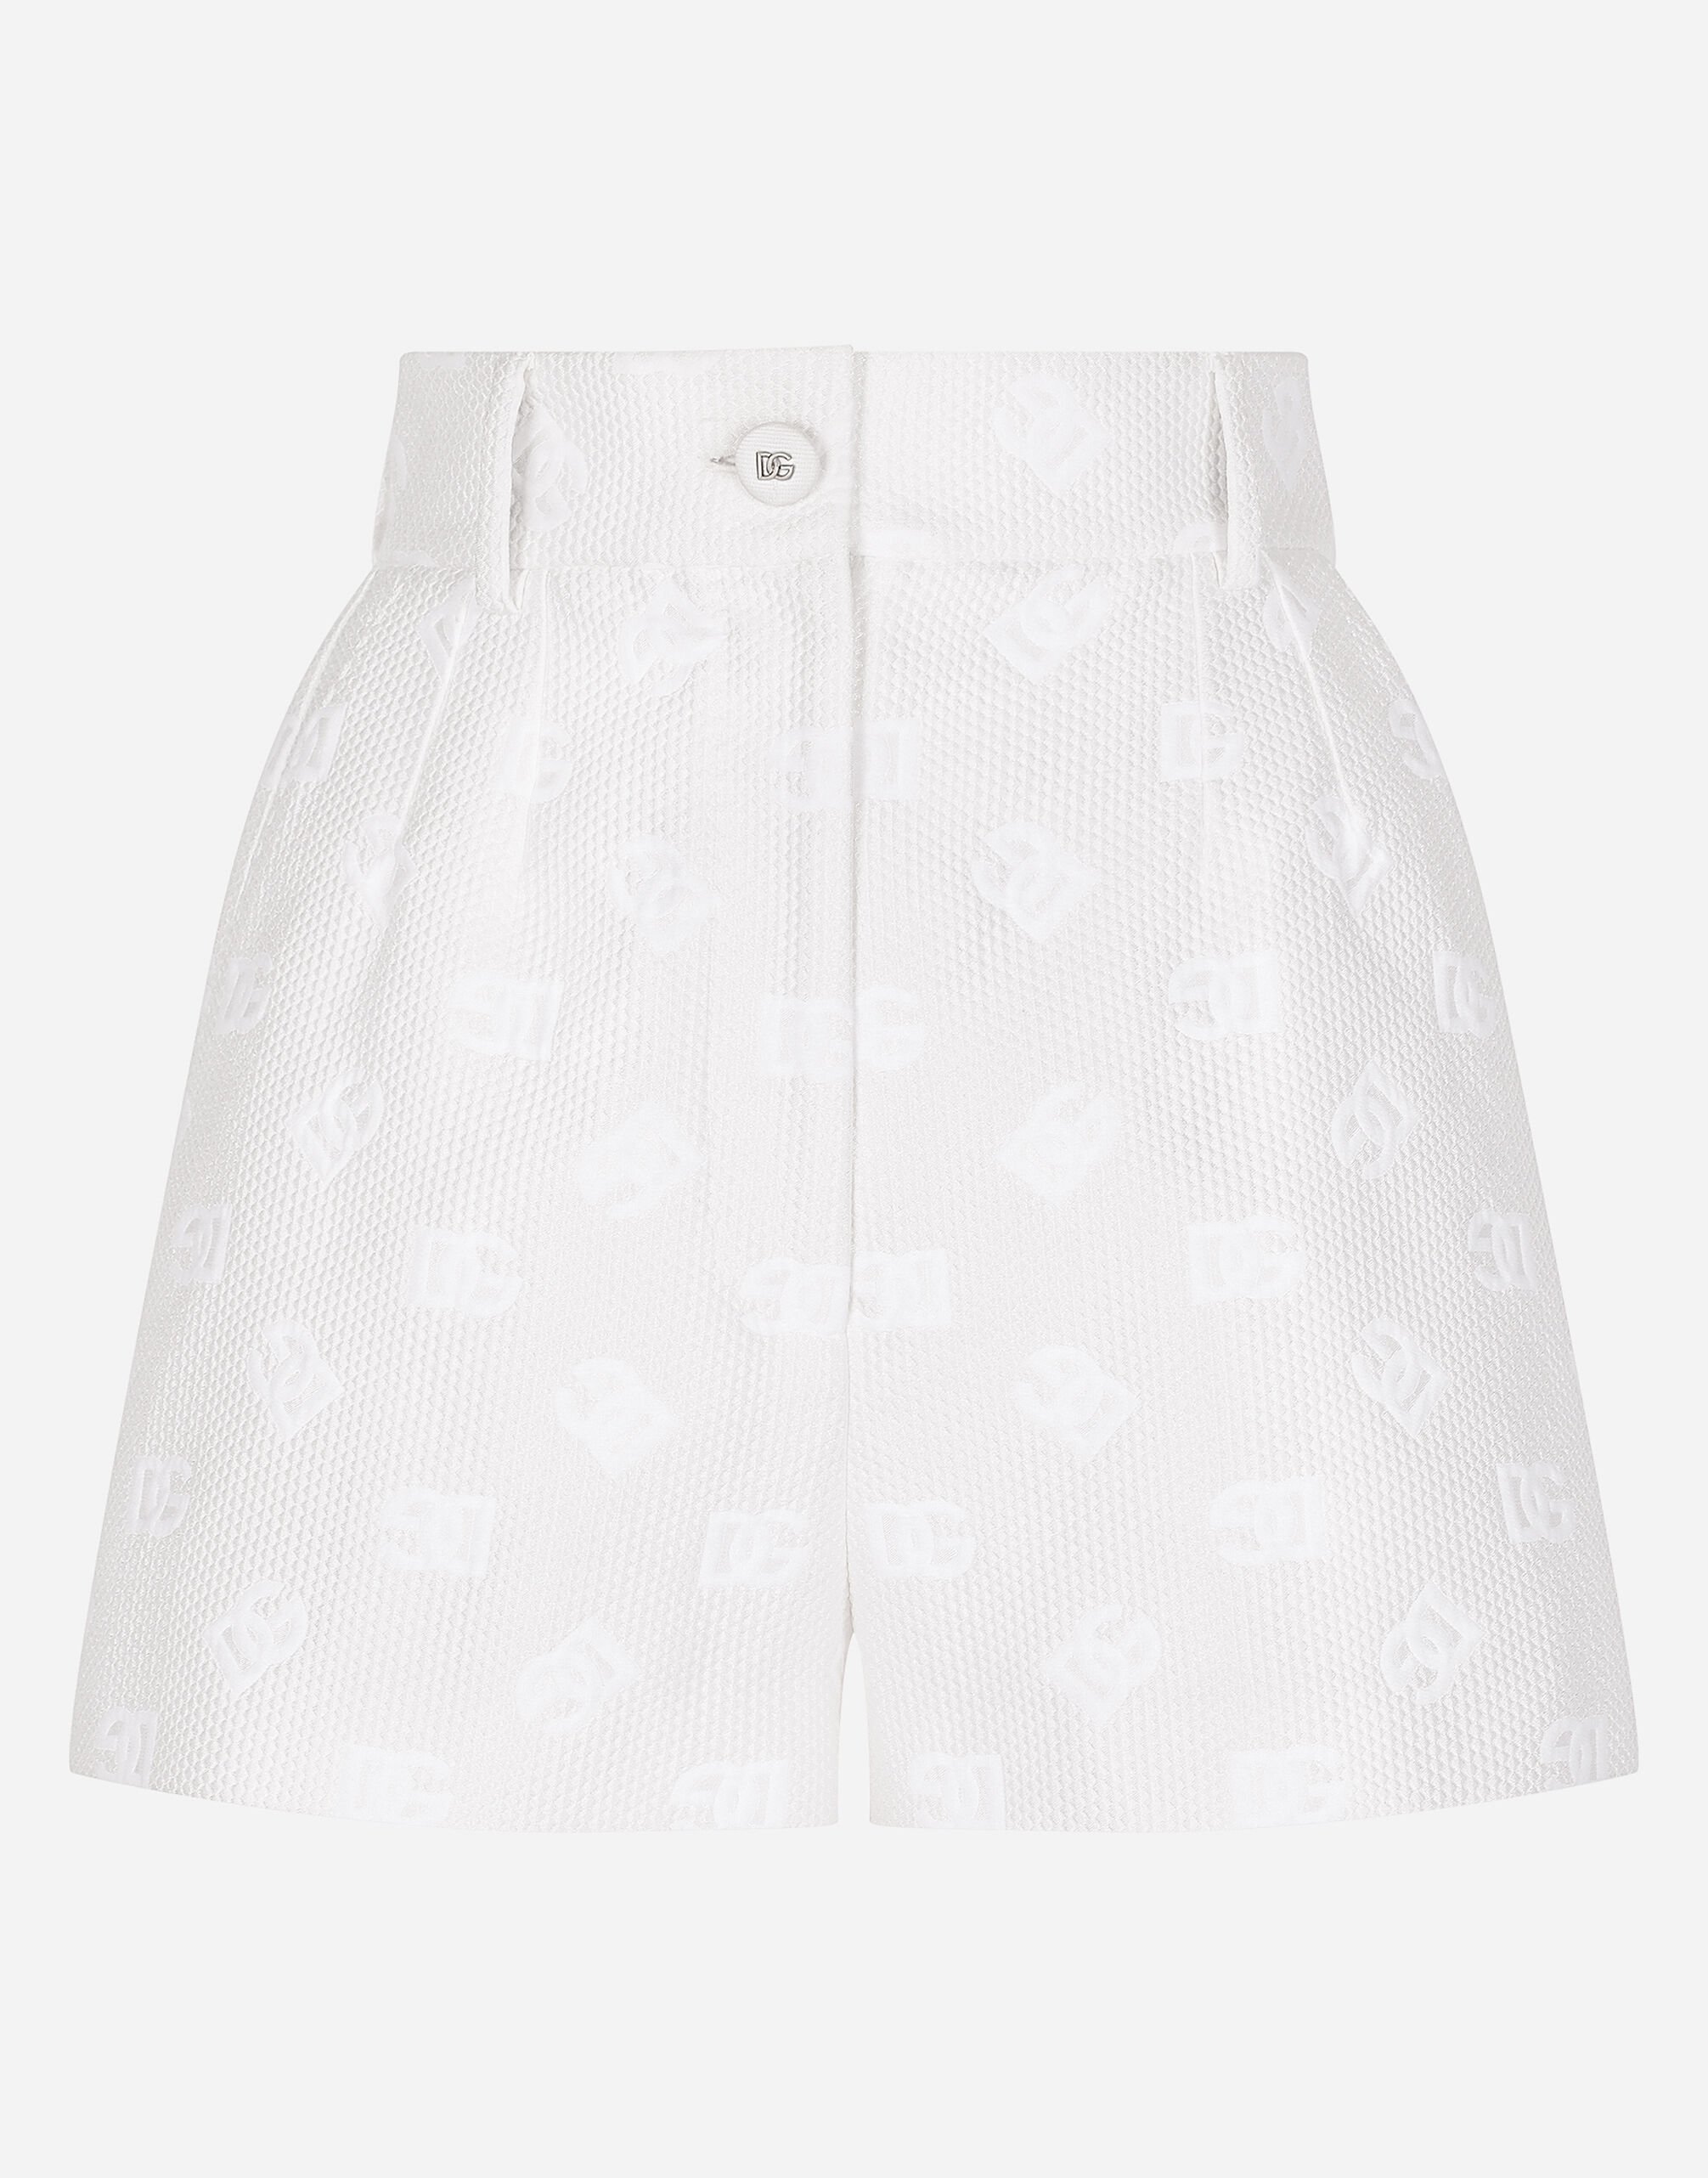 Dolce & Gabbana Jacquard shorts with all-over DG logo Print FTCJUTHS5NO